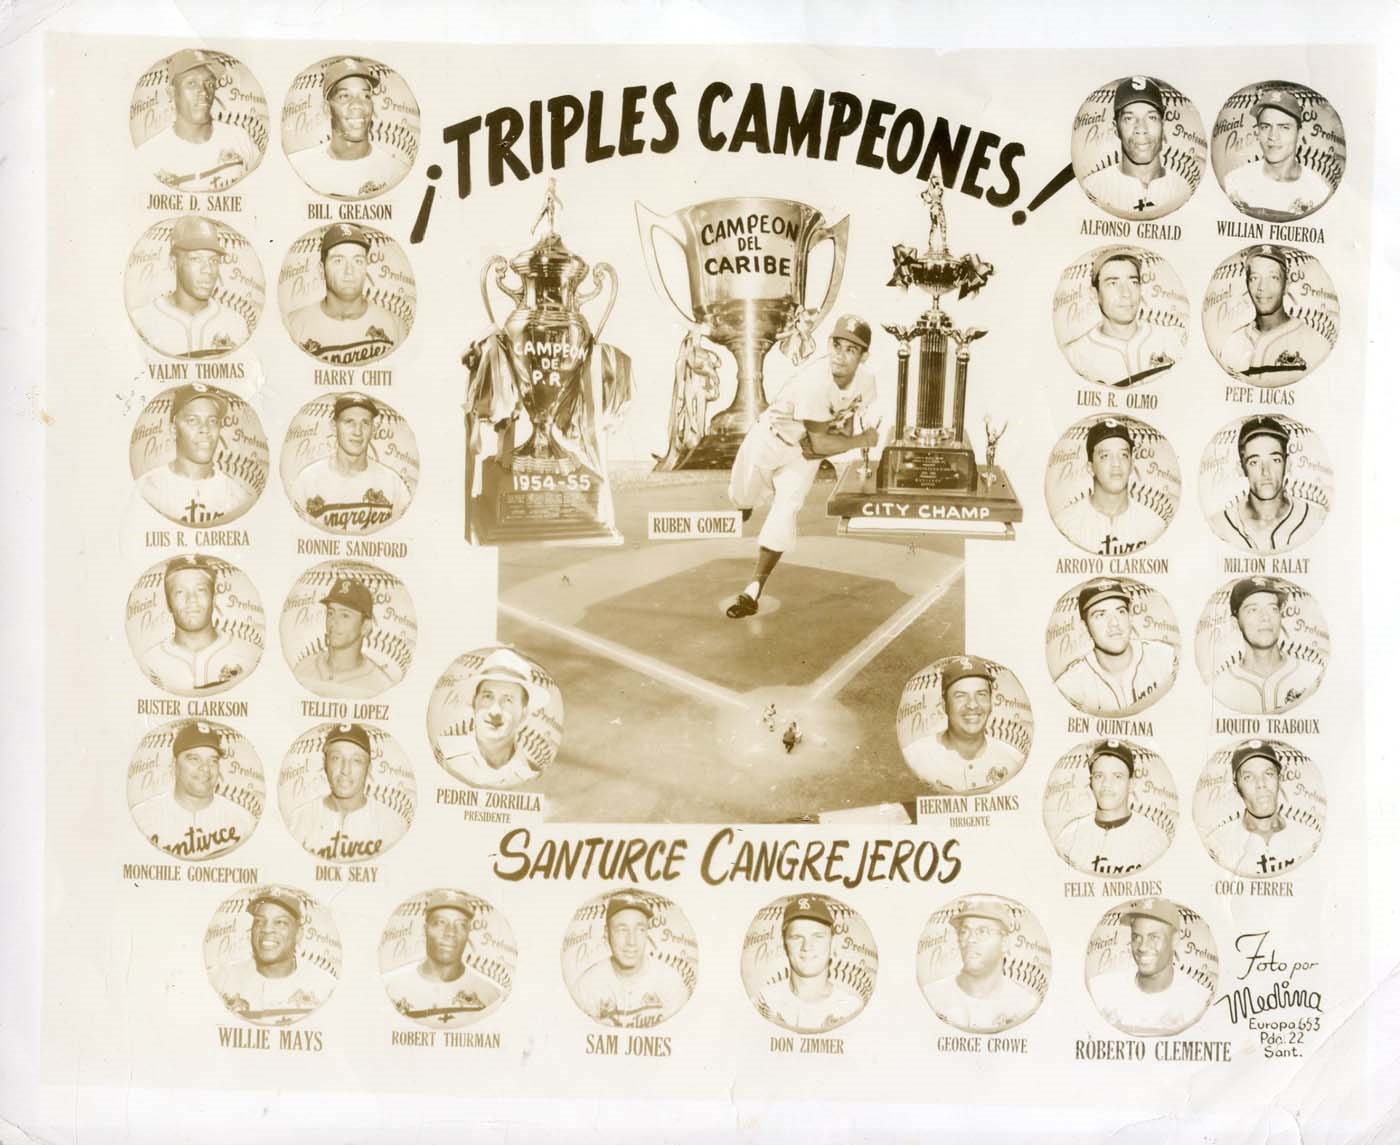 1954-55 Santurce Cangrejeros Championship Team Photo with Clemente and Mays